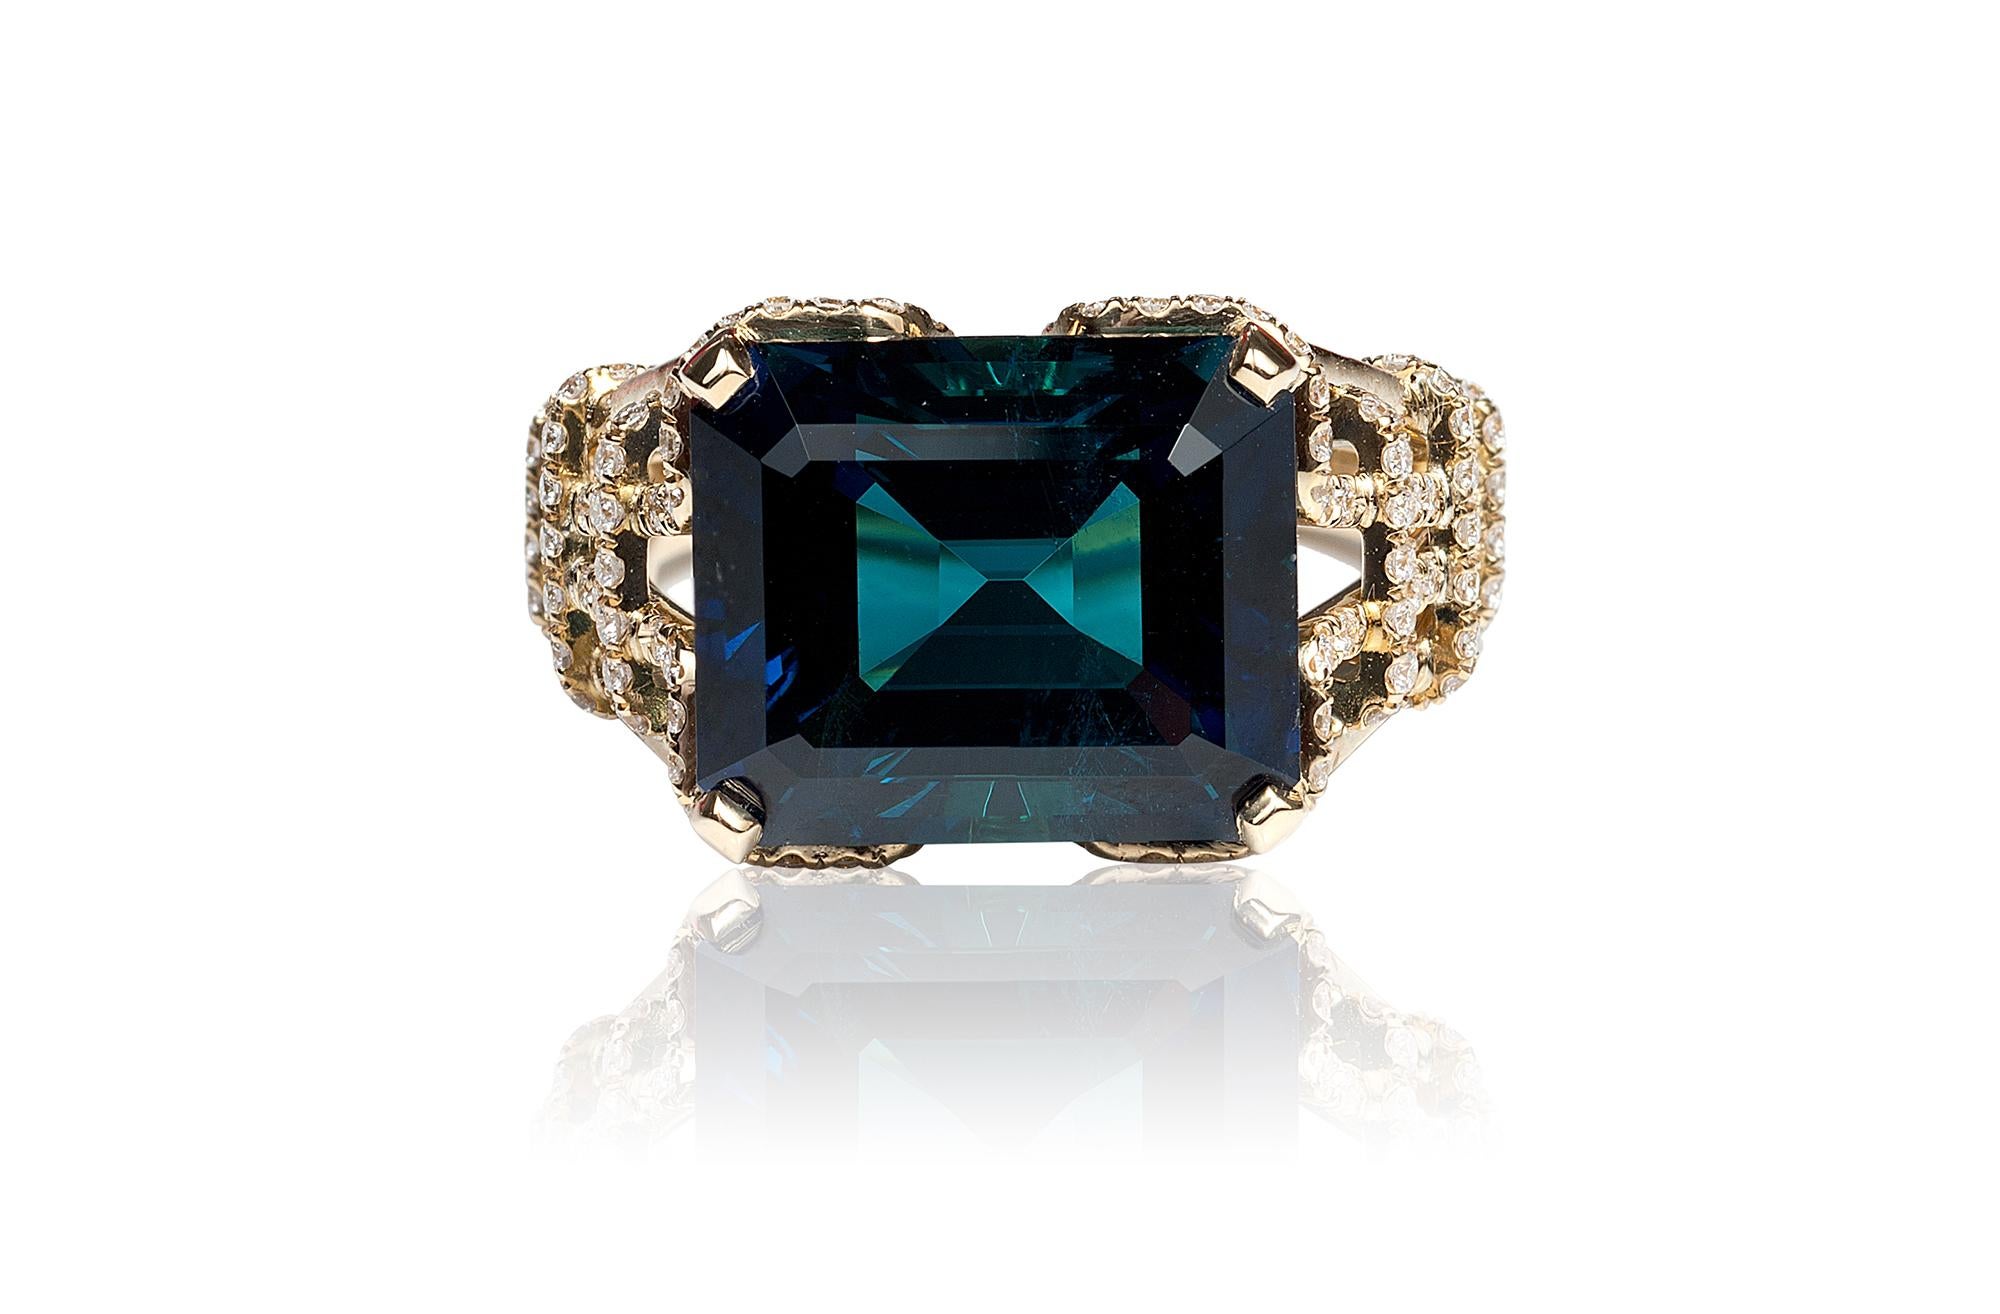 Indicolite Emerald Cut Ring in 18K Yellow Gold with Diamonds on Prong and Shank, from 'G-One' Collection 

Stone Size: 12.27 x 11.7 mm

Approx. Wt: 8.5 Carats (Indicolite)

Diamonds: G-H / VS, Approx. Wt: 0.58 Carats 